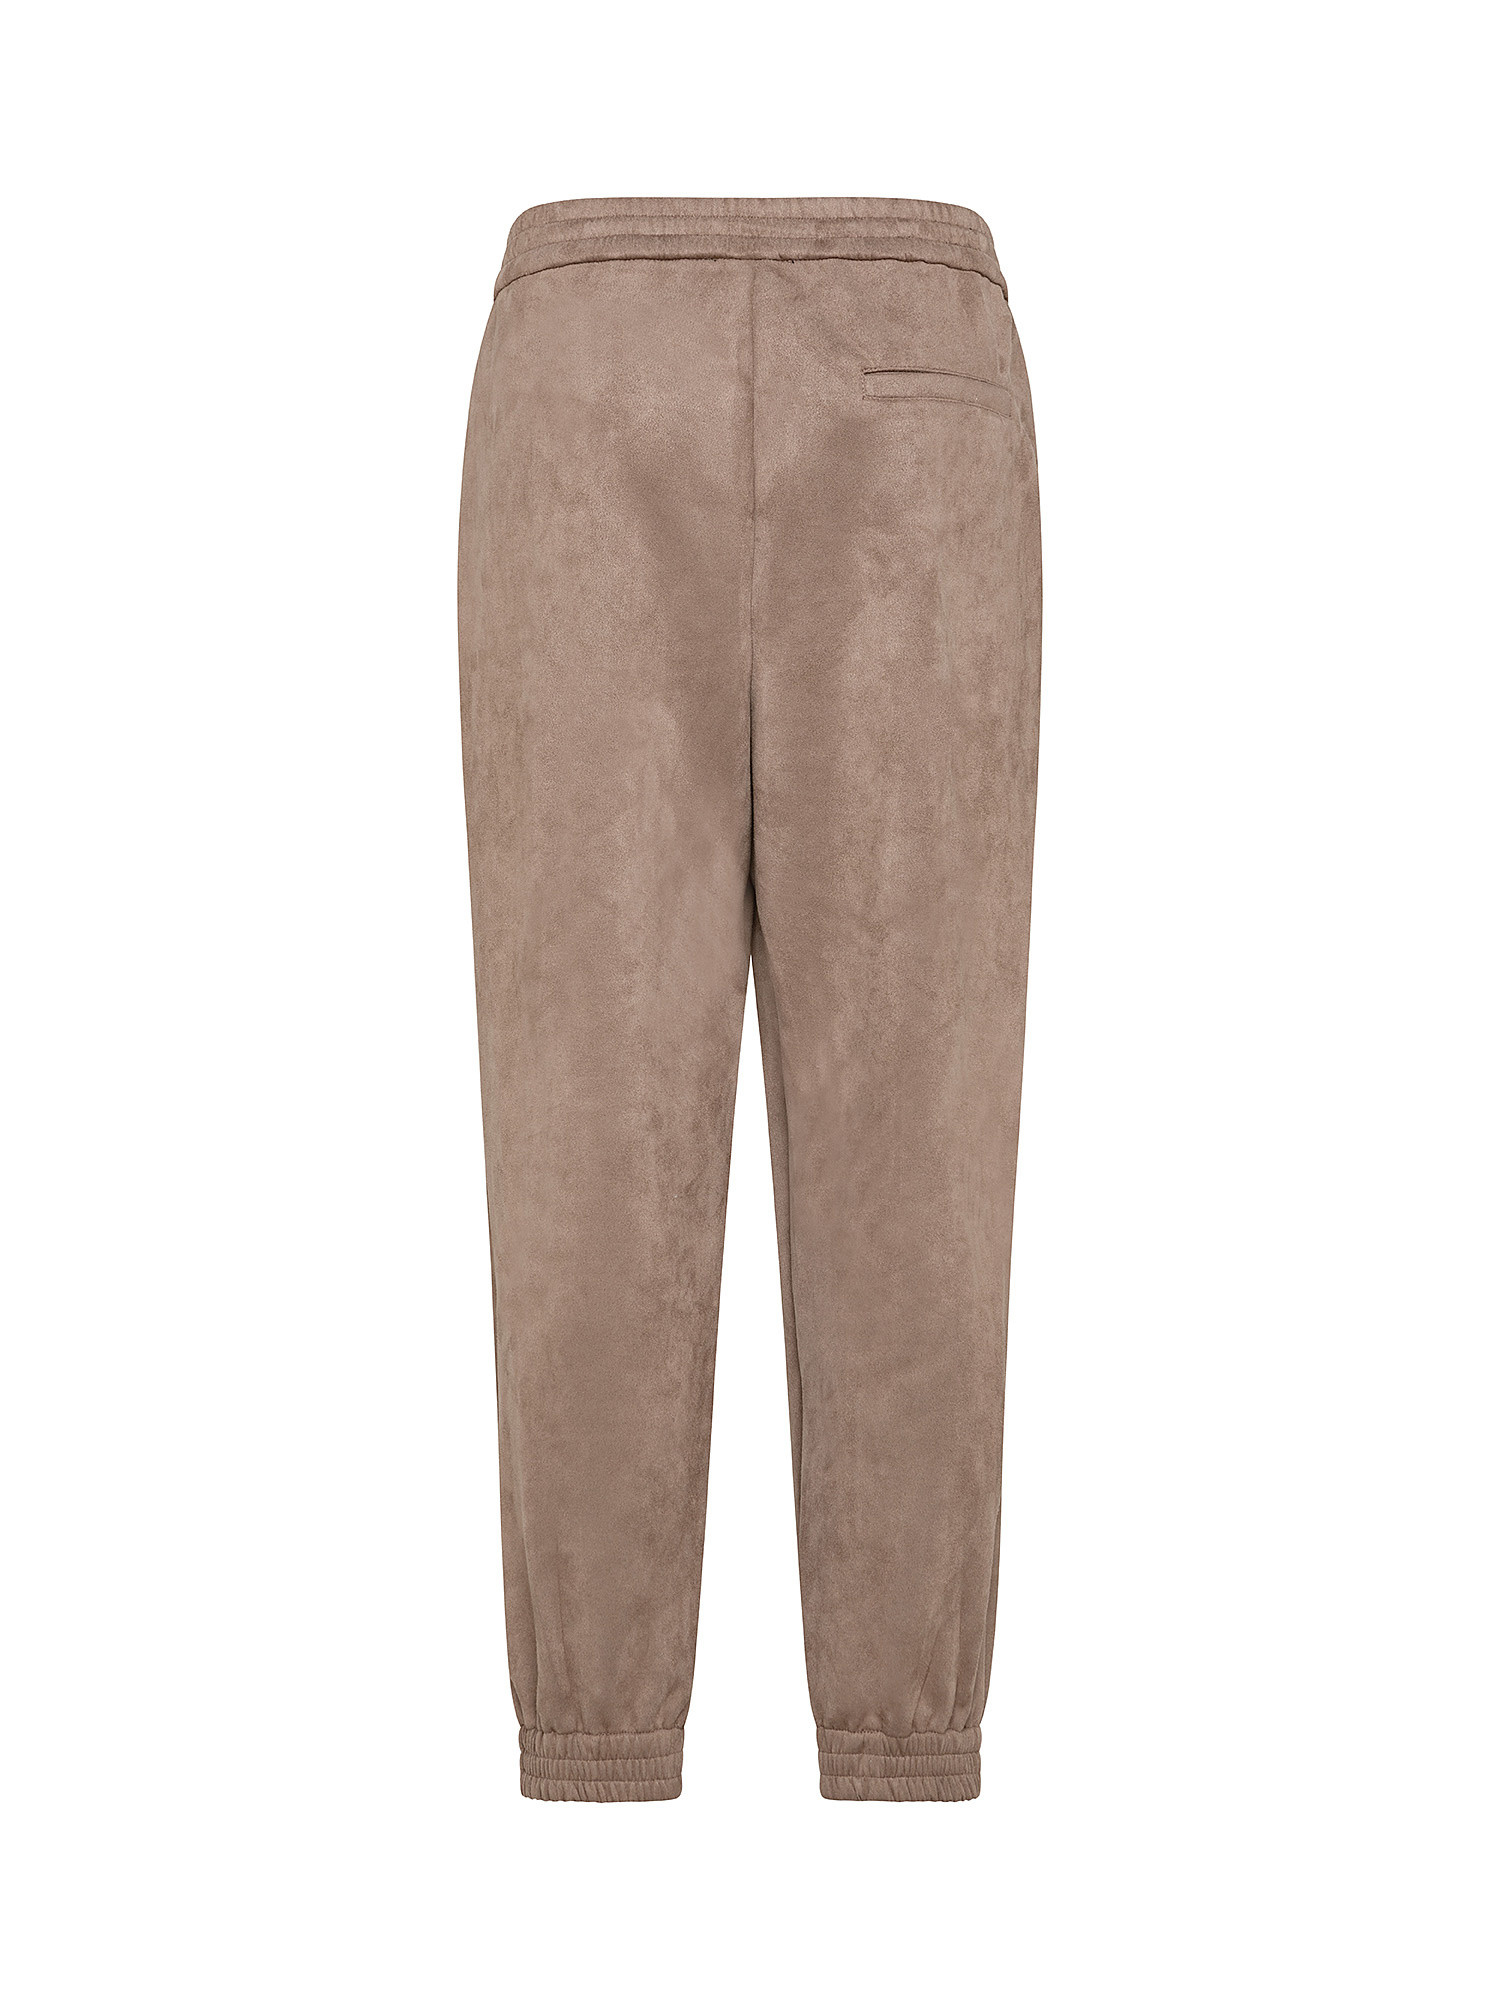 Suede jogger trousers, Brown, large image number 1